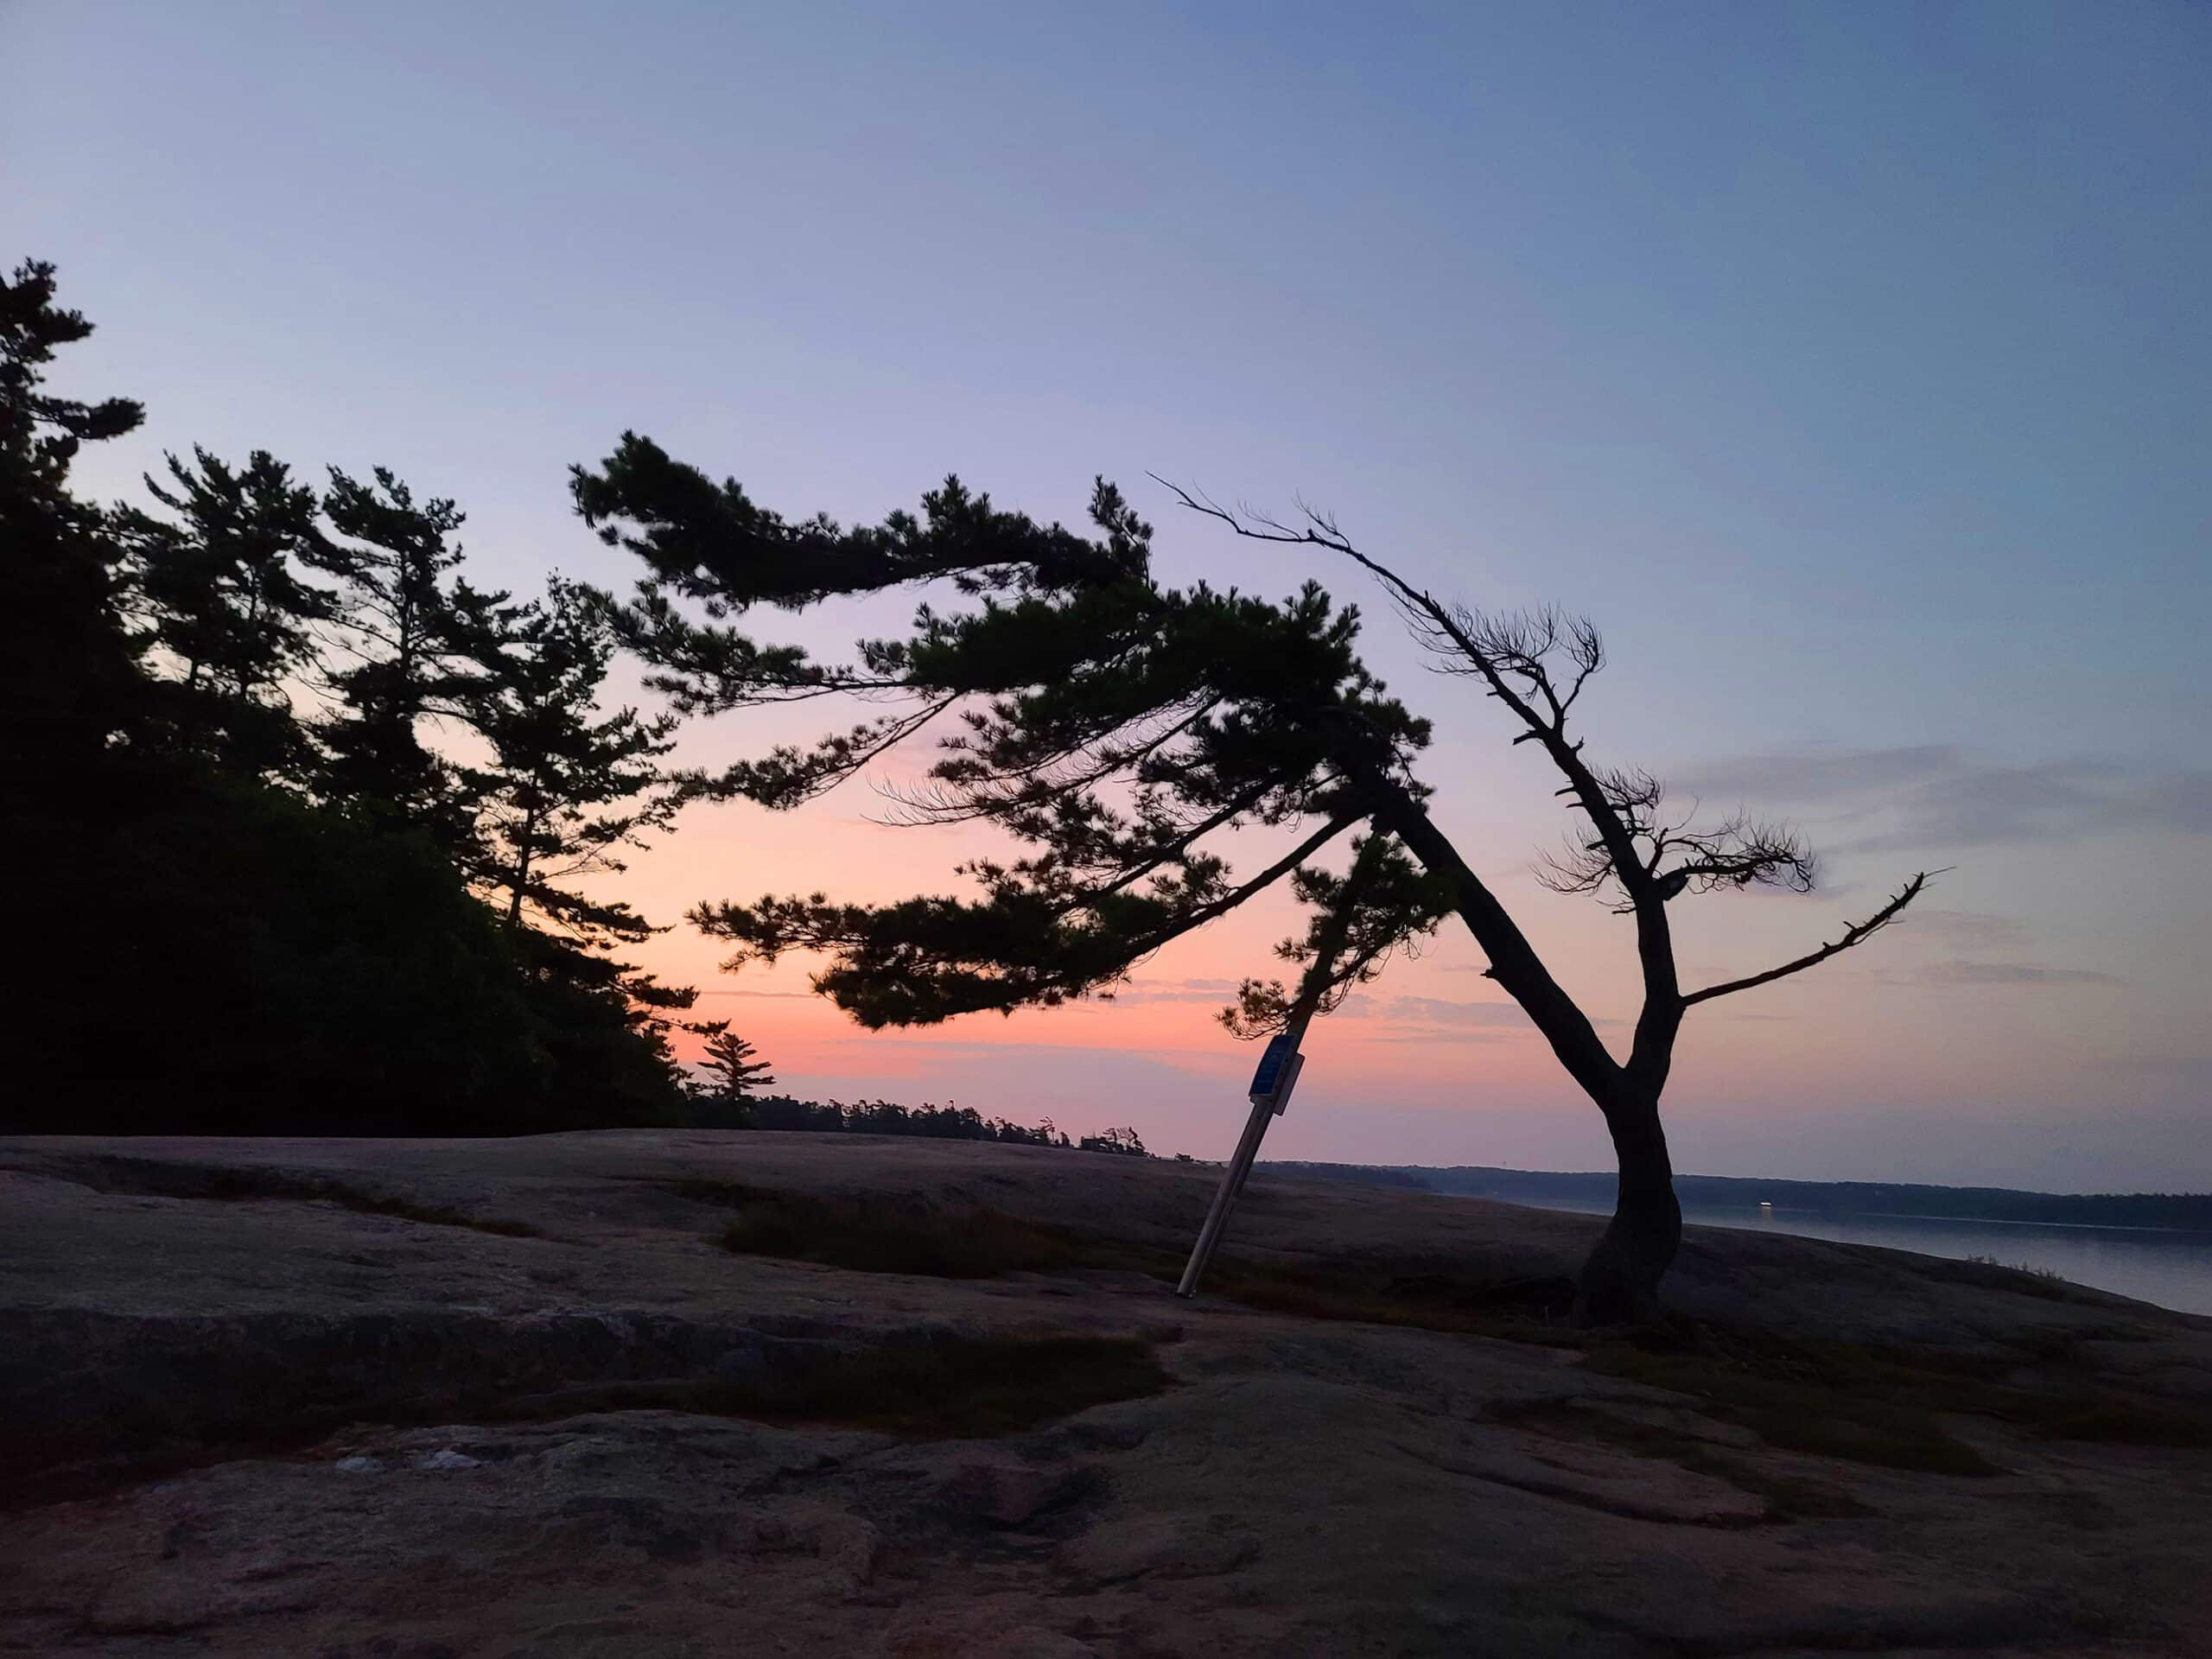 The silhouette of a windswept tree, with sunrise in the background.